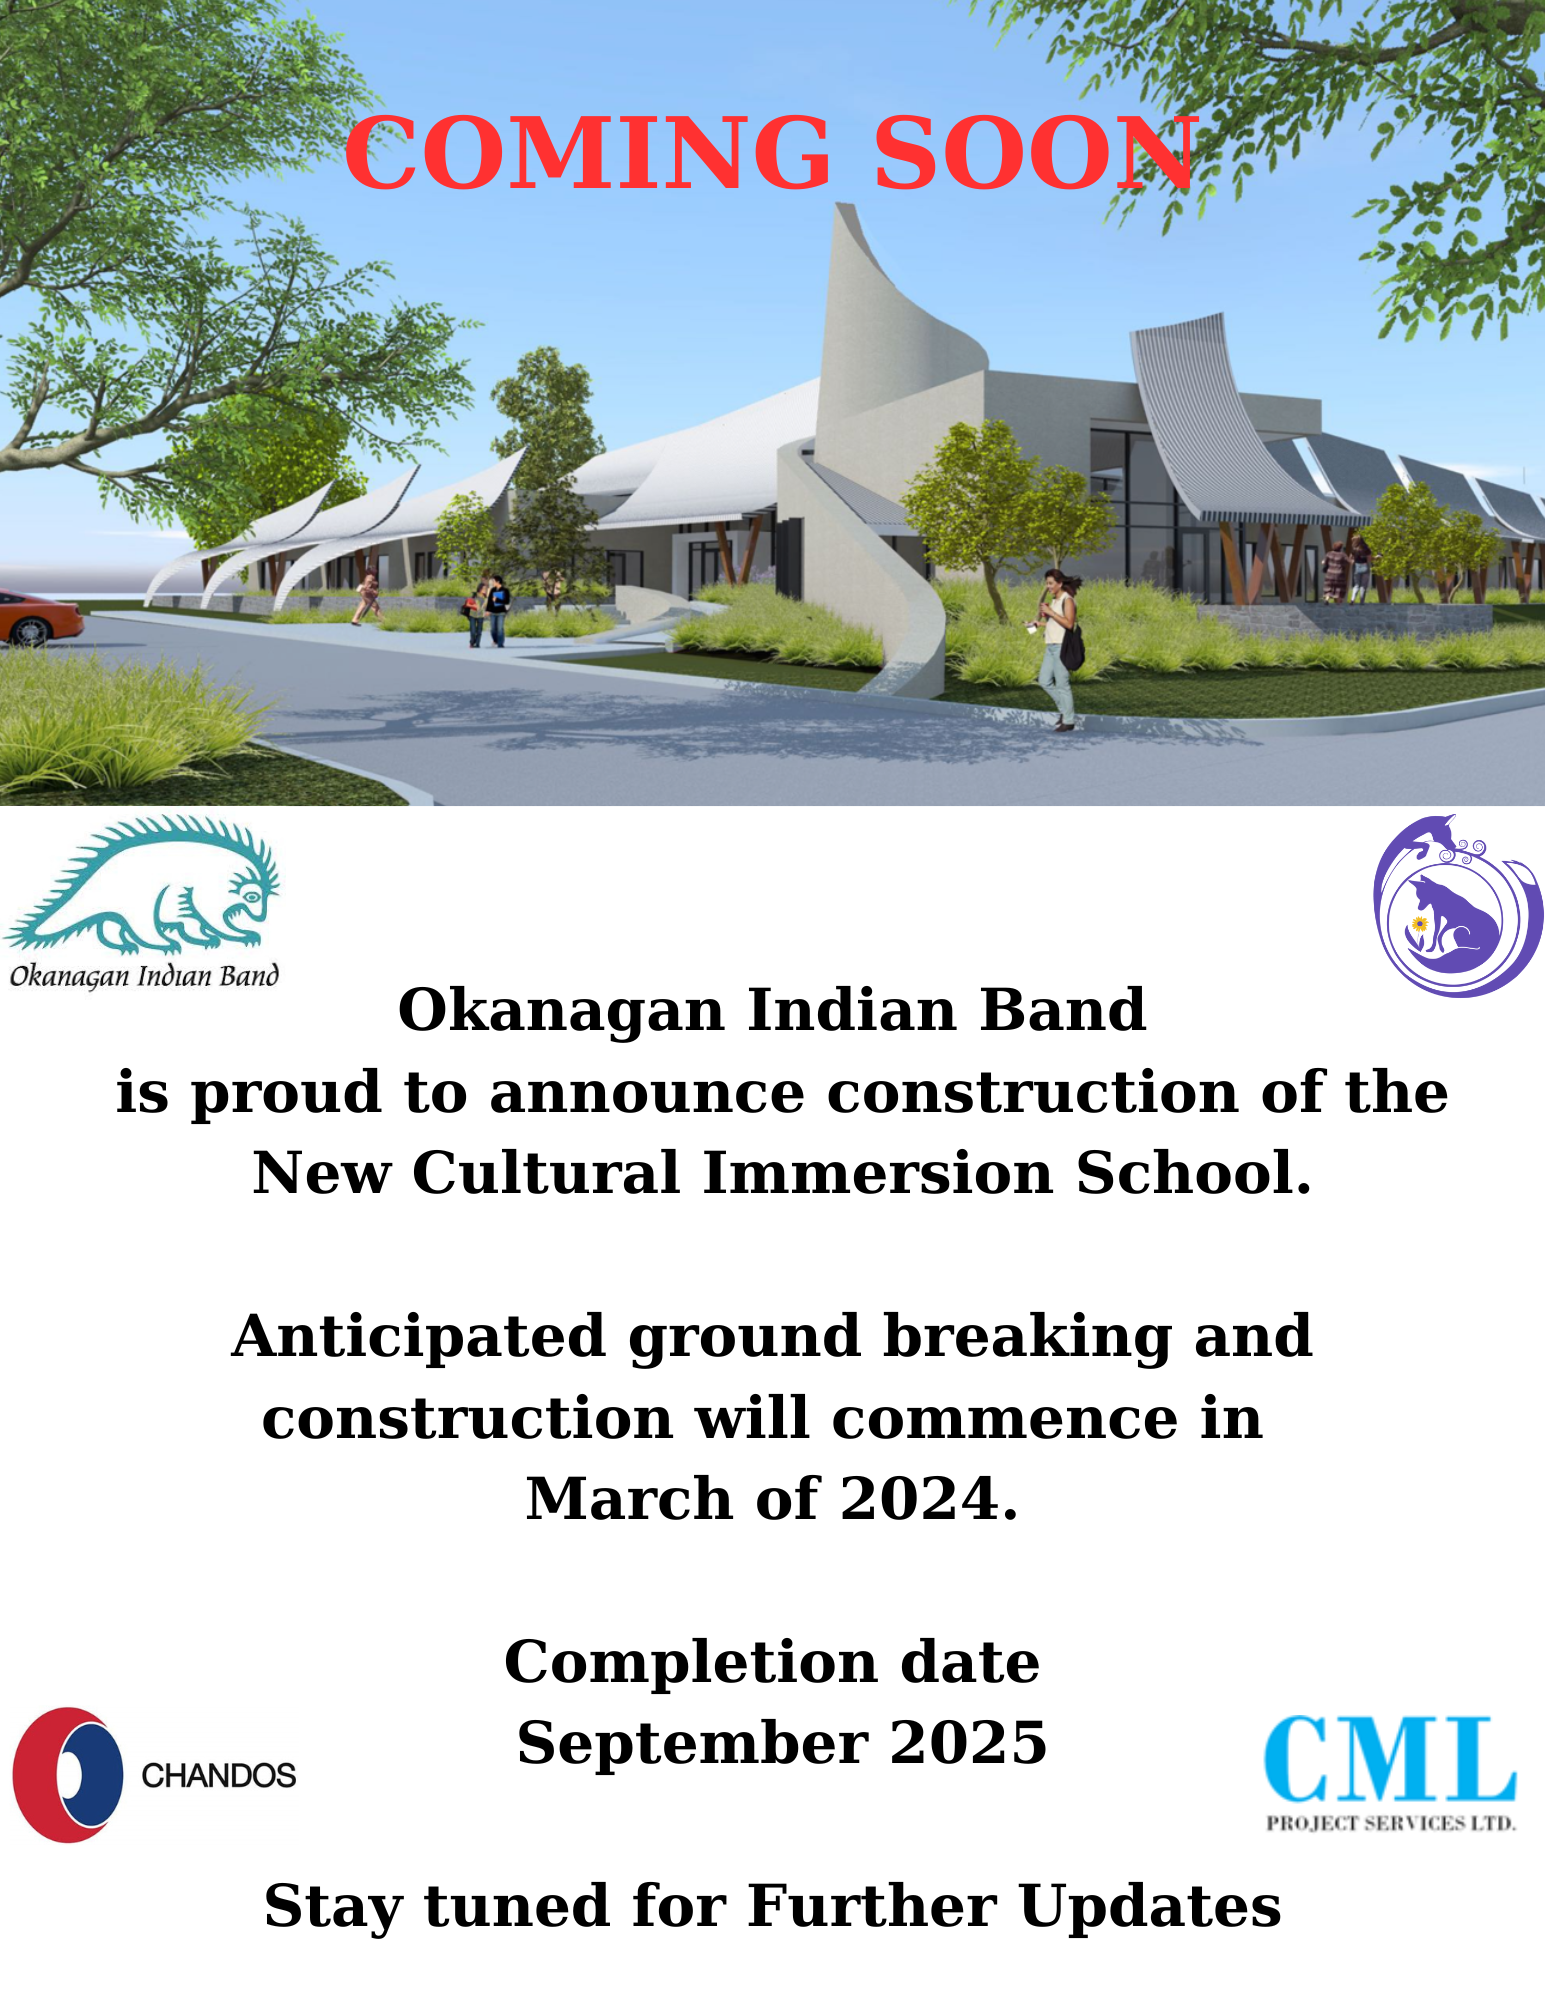 New Cultural Immersion School Ground Breaking announcement